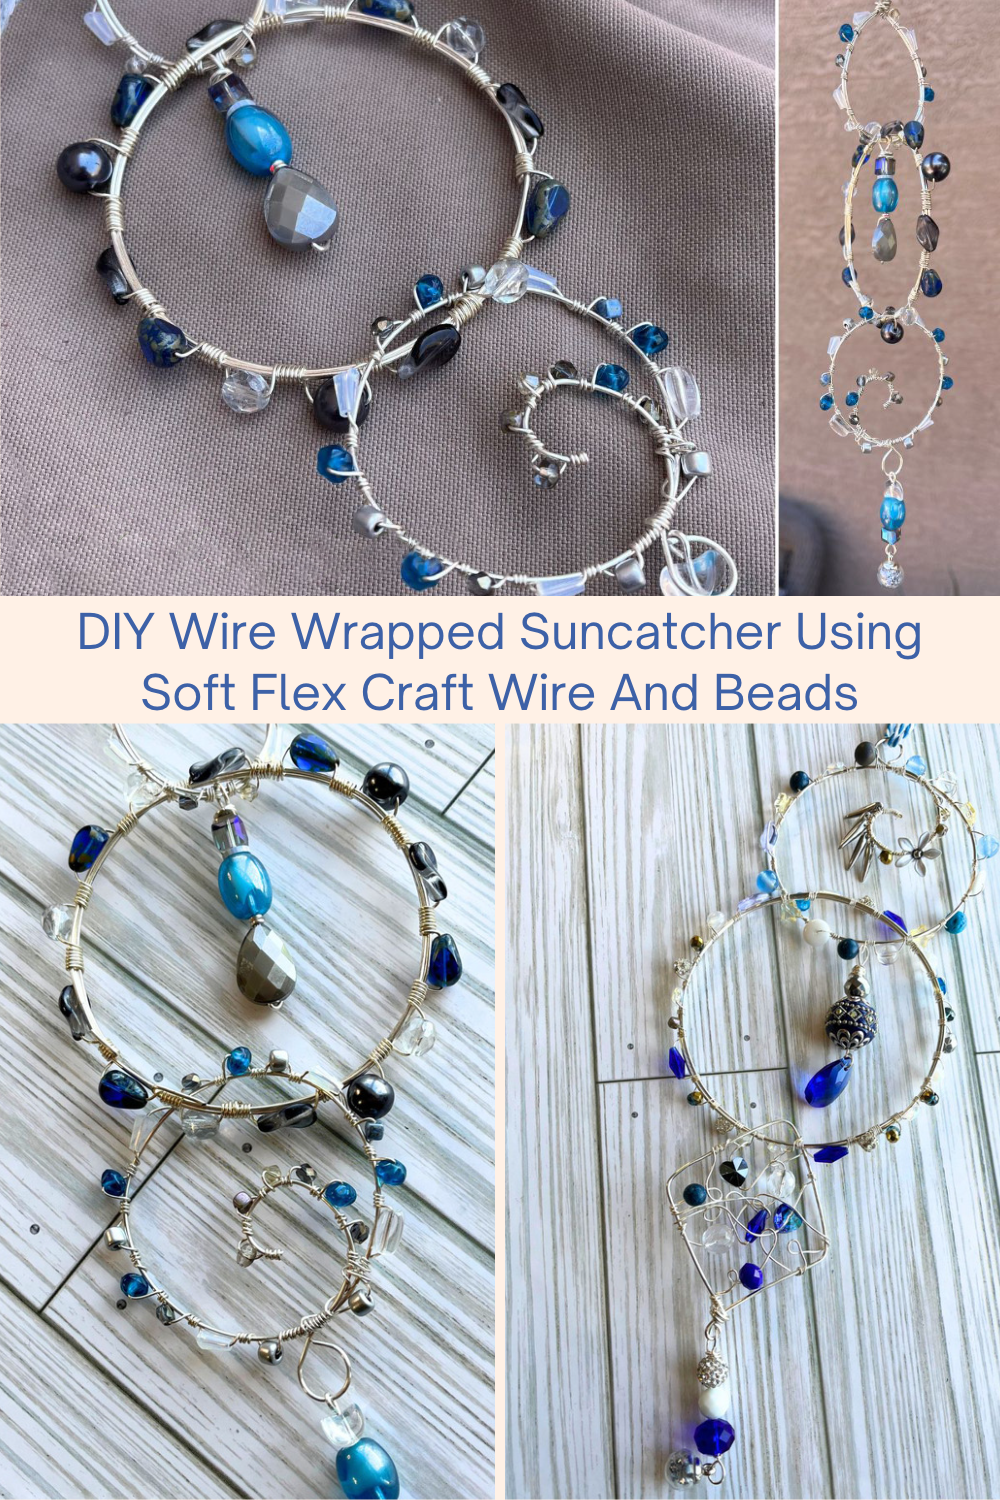 DIY Wire Wrapped Suncatcher Using Soft Flex Craft Wire And Beads Collage